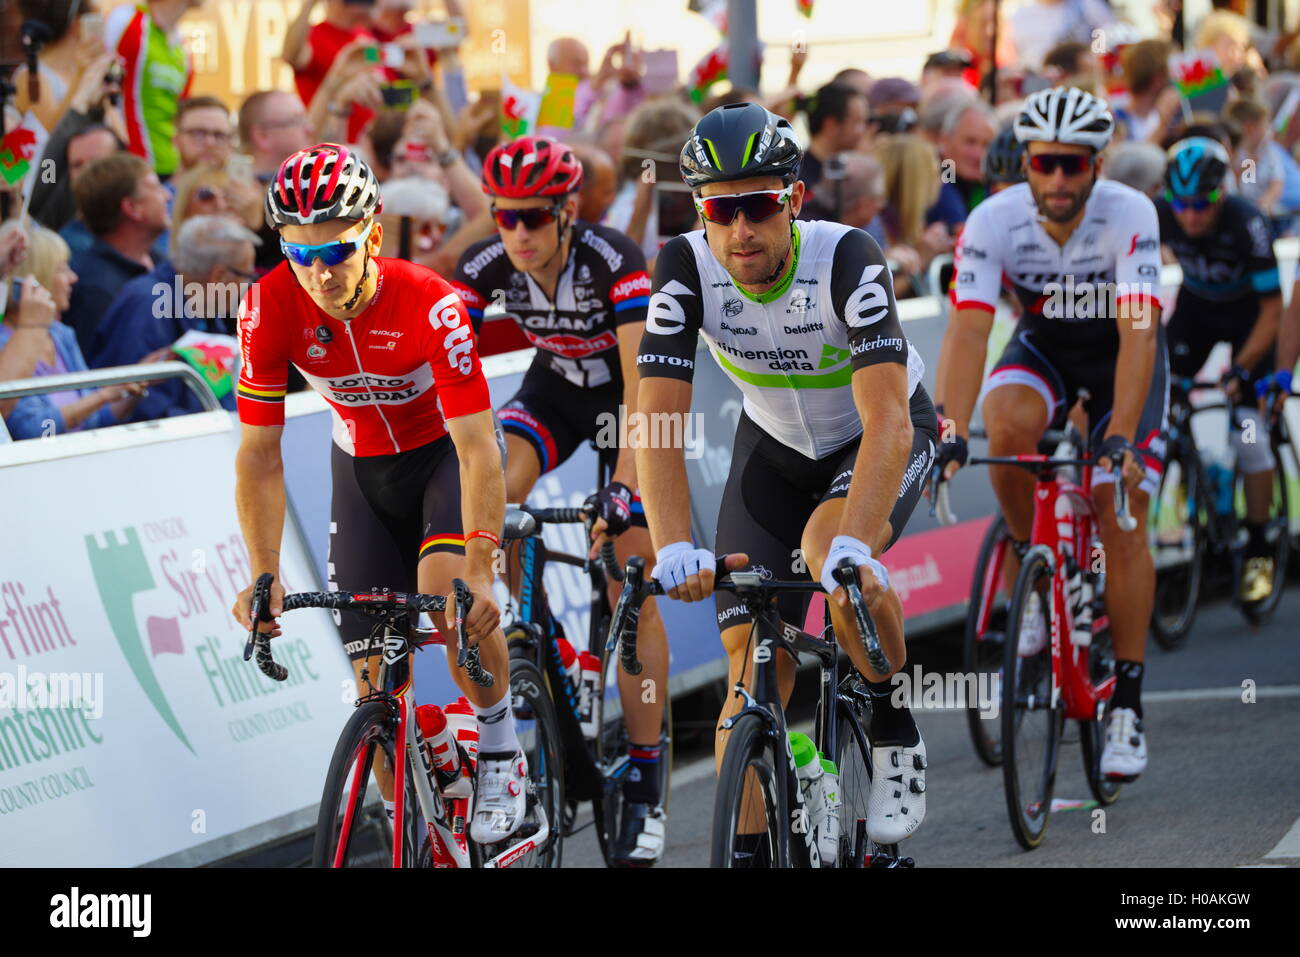 Cyclists at Tour of Britain, Cycle Race Stock Photo - Alamy